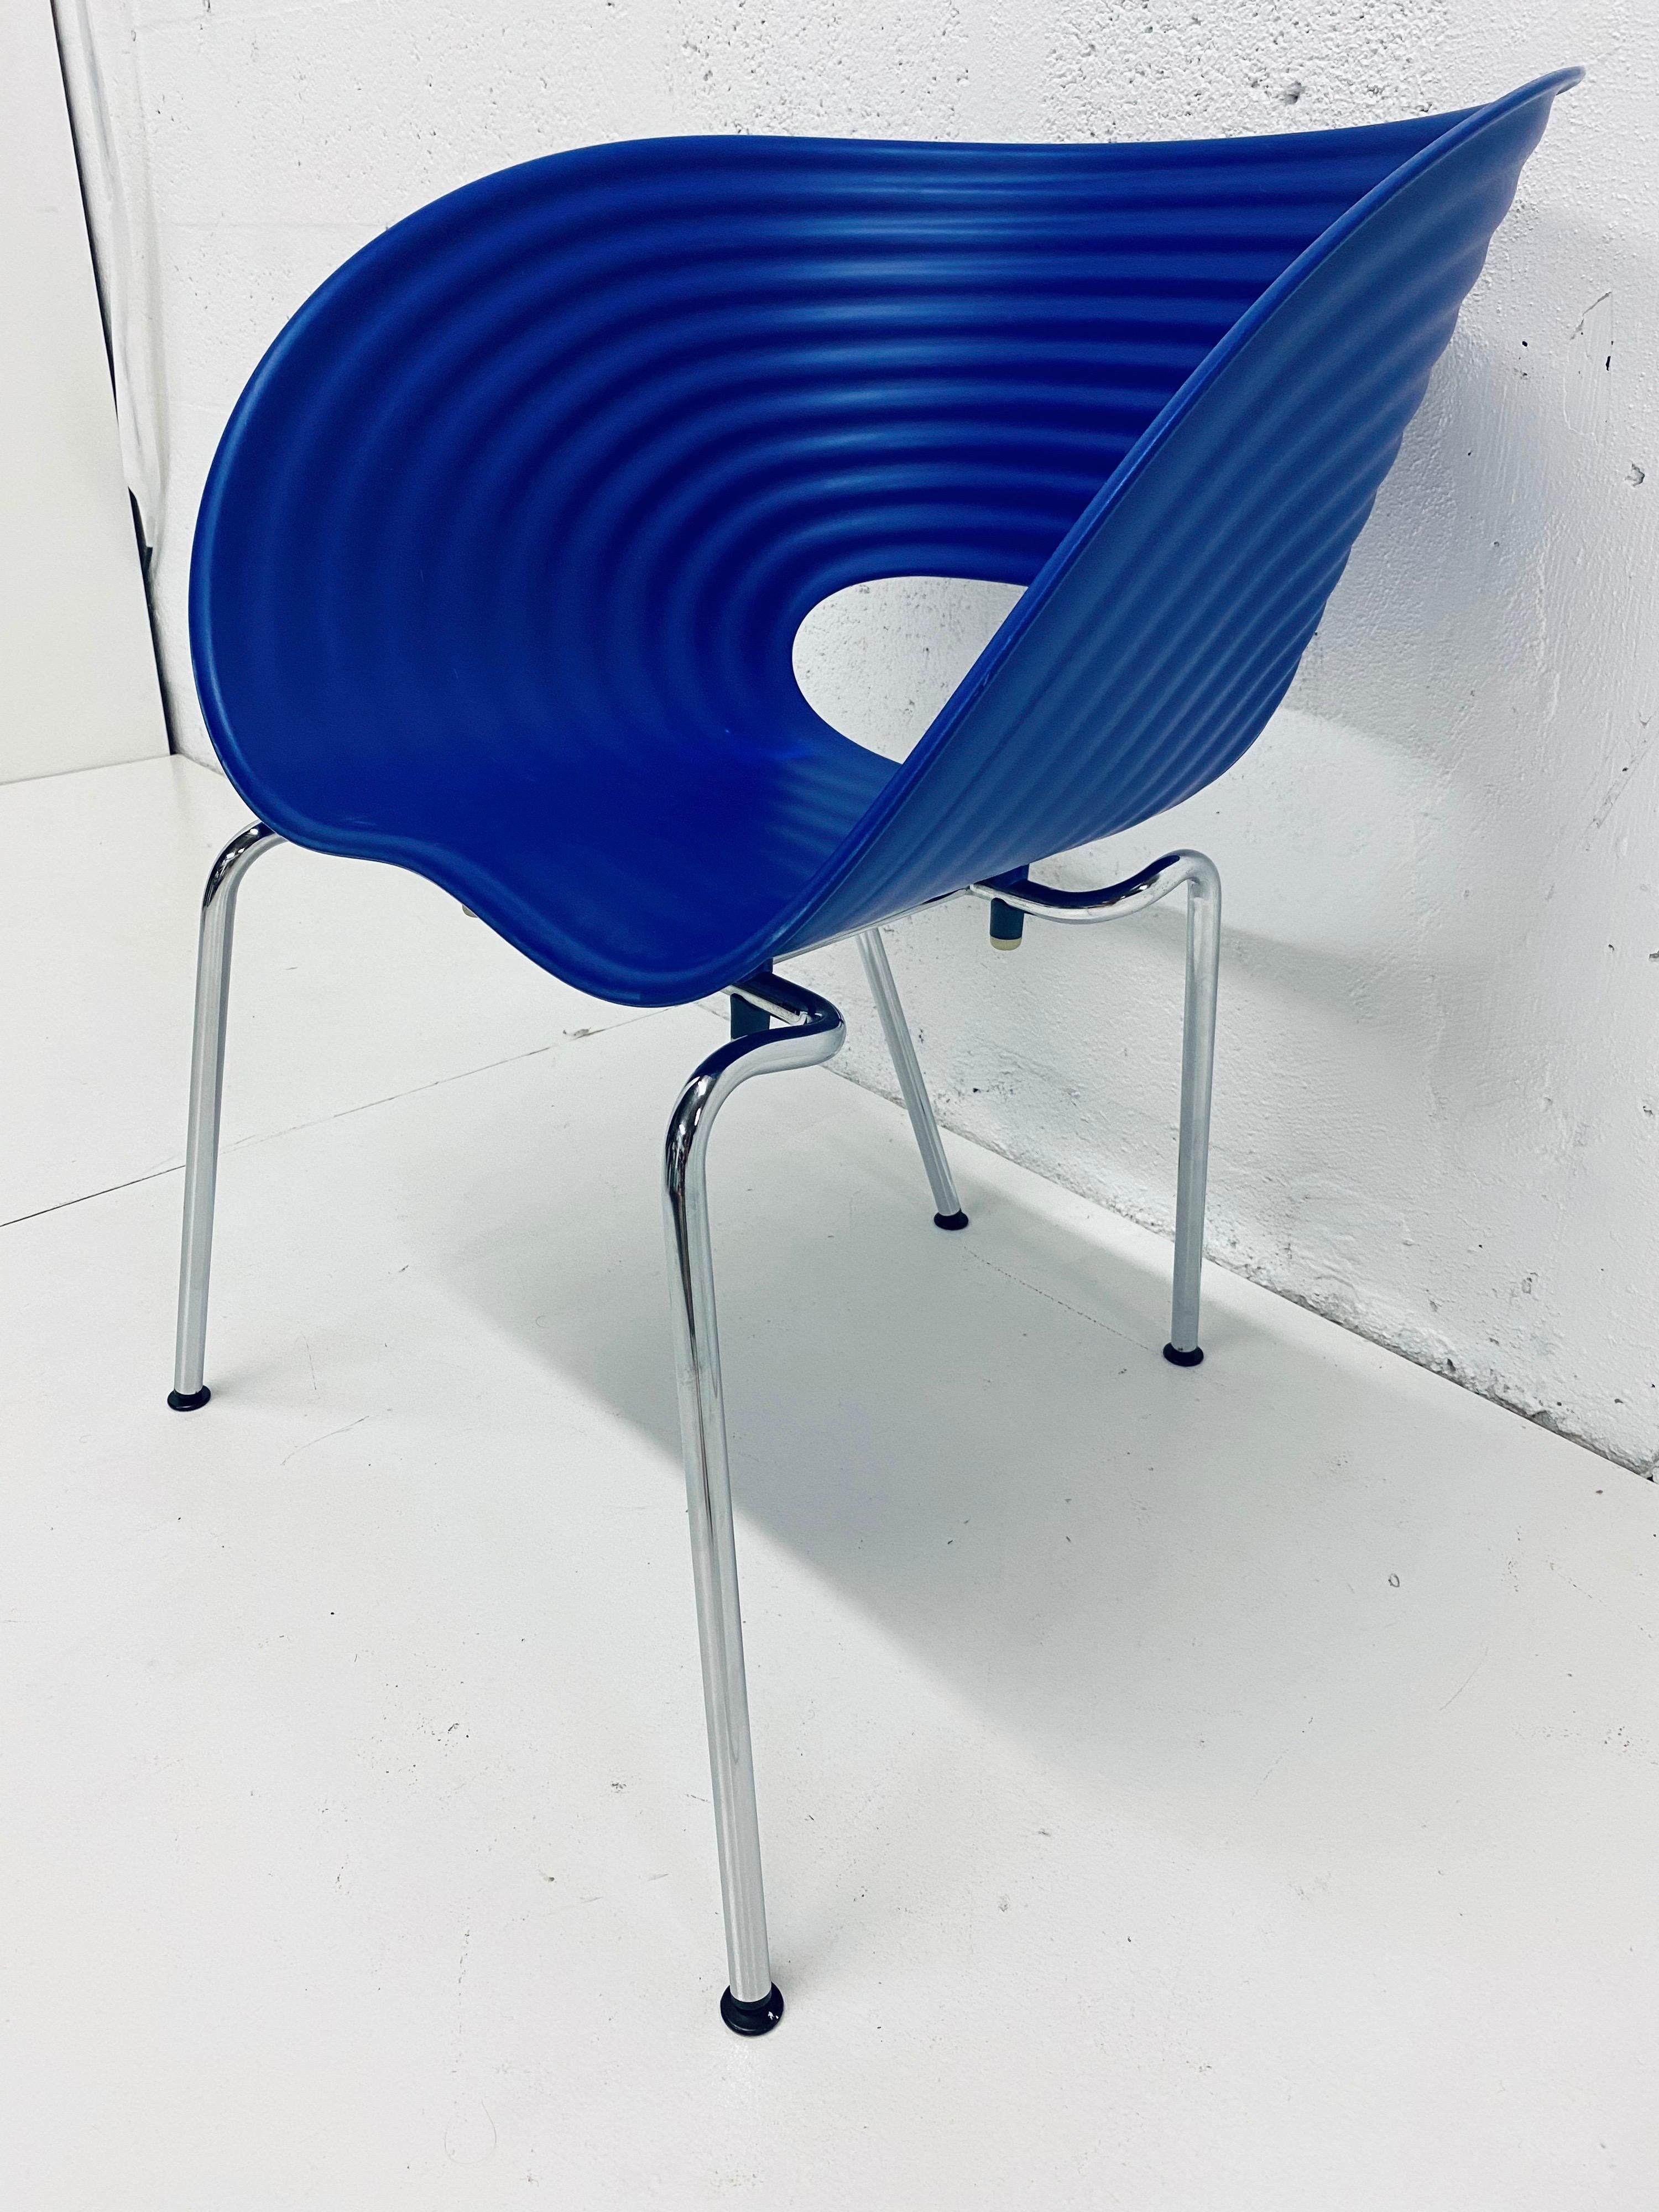 Cobalt blue Tom Vac plastic shell chair designed by Ron Arad and manufactured by Vitra, Germany 1999. This color has been discontinued and is no longer available from Vitra.

Tom Vac chair offers a high degree of comfort both indoors and out. The